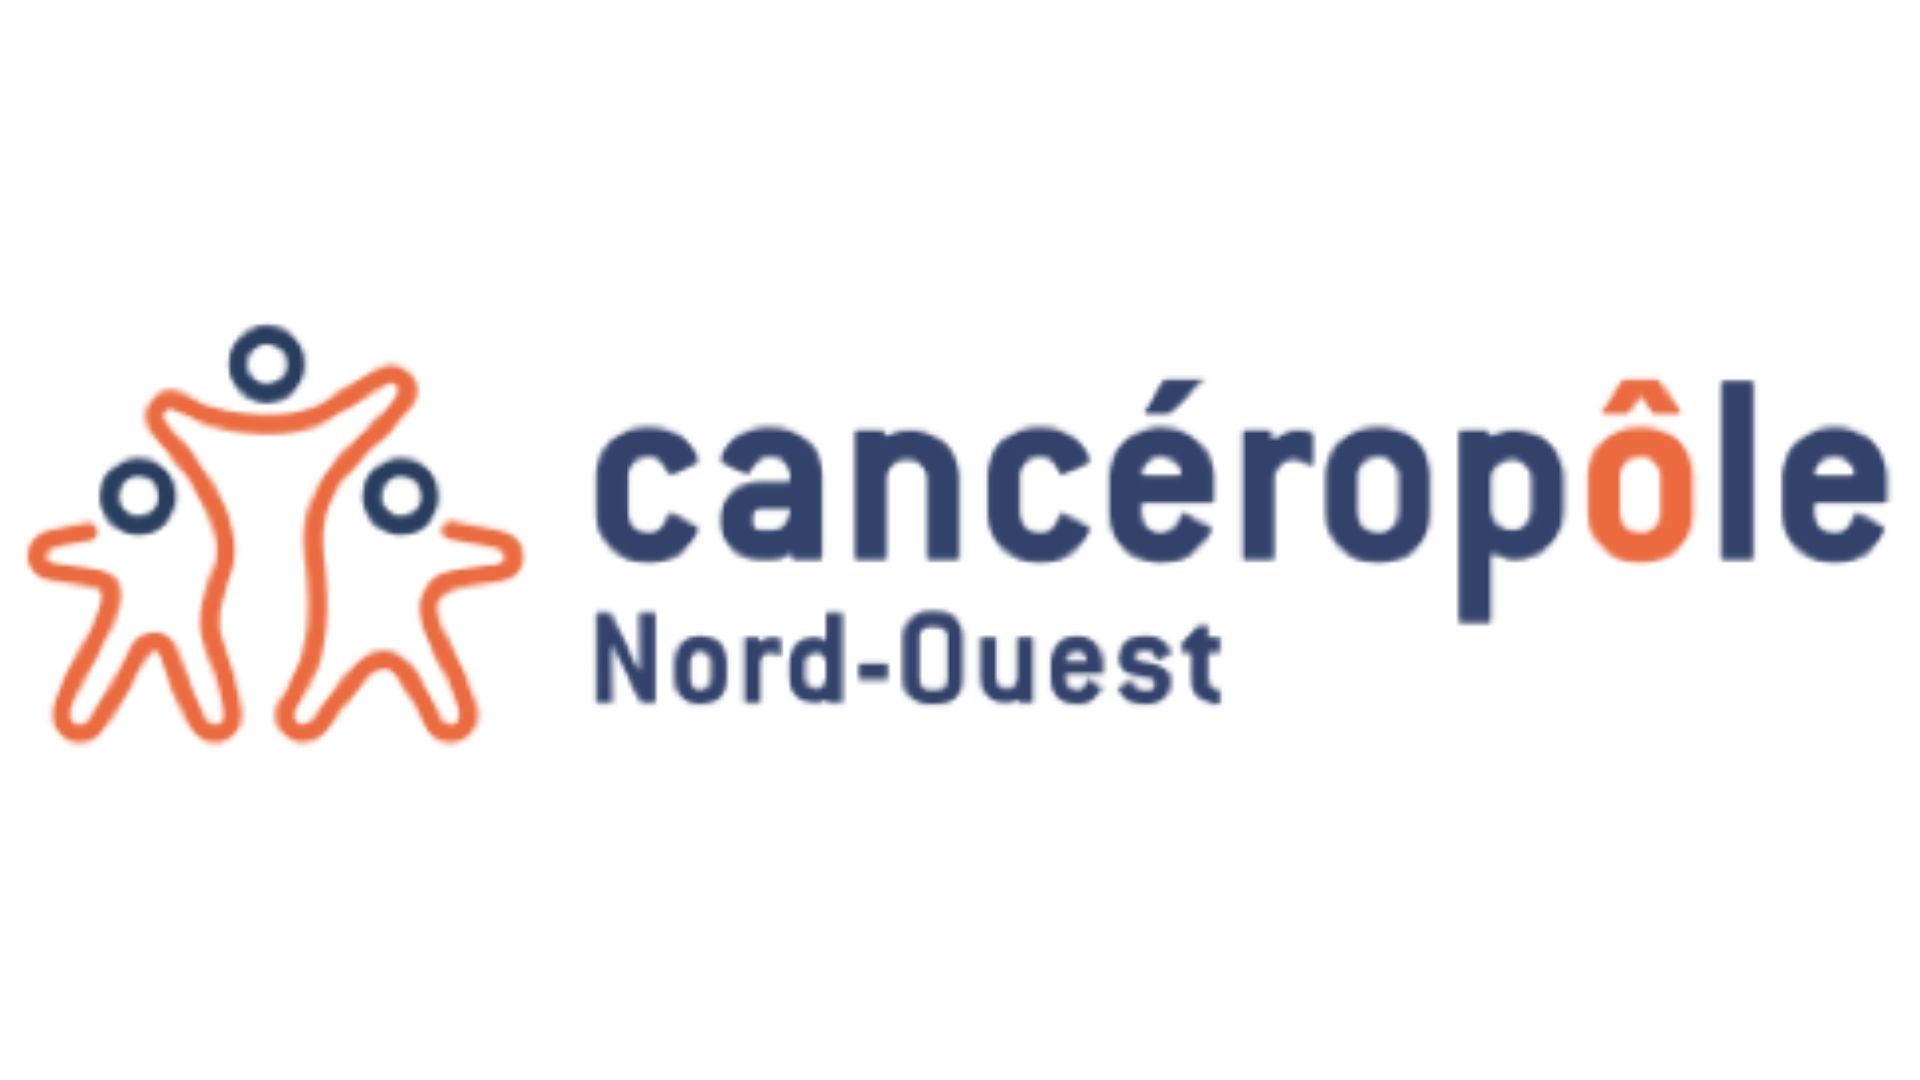 Canceropole Nord Ouest